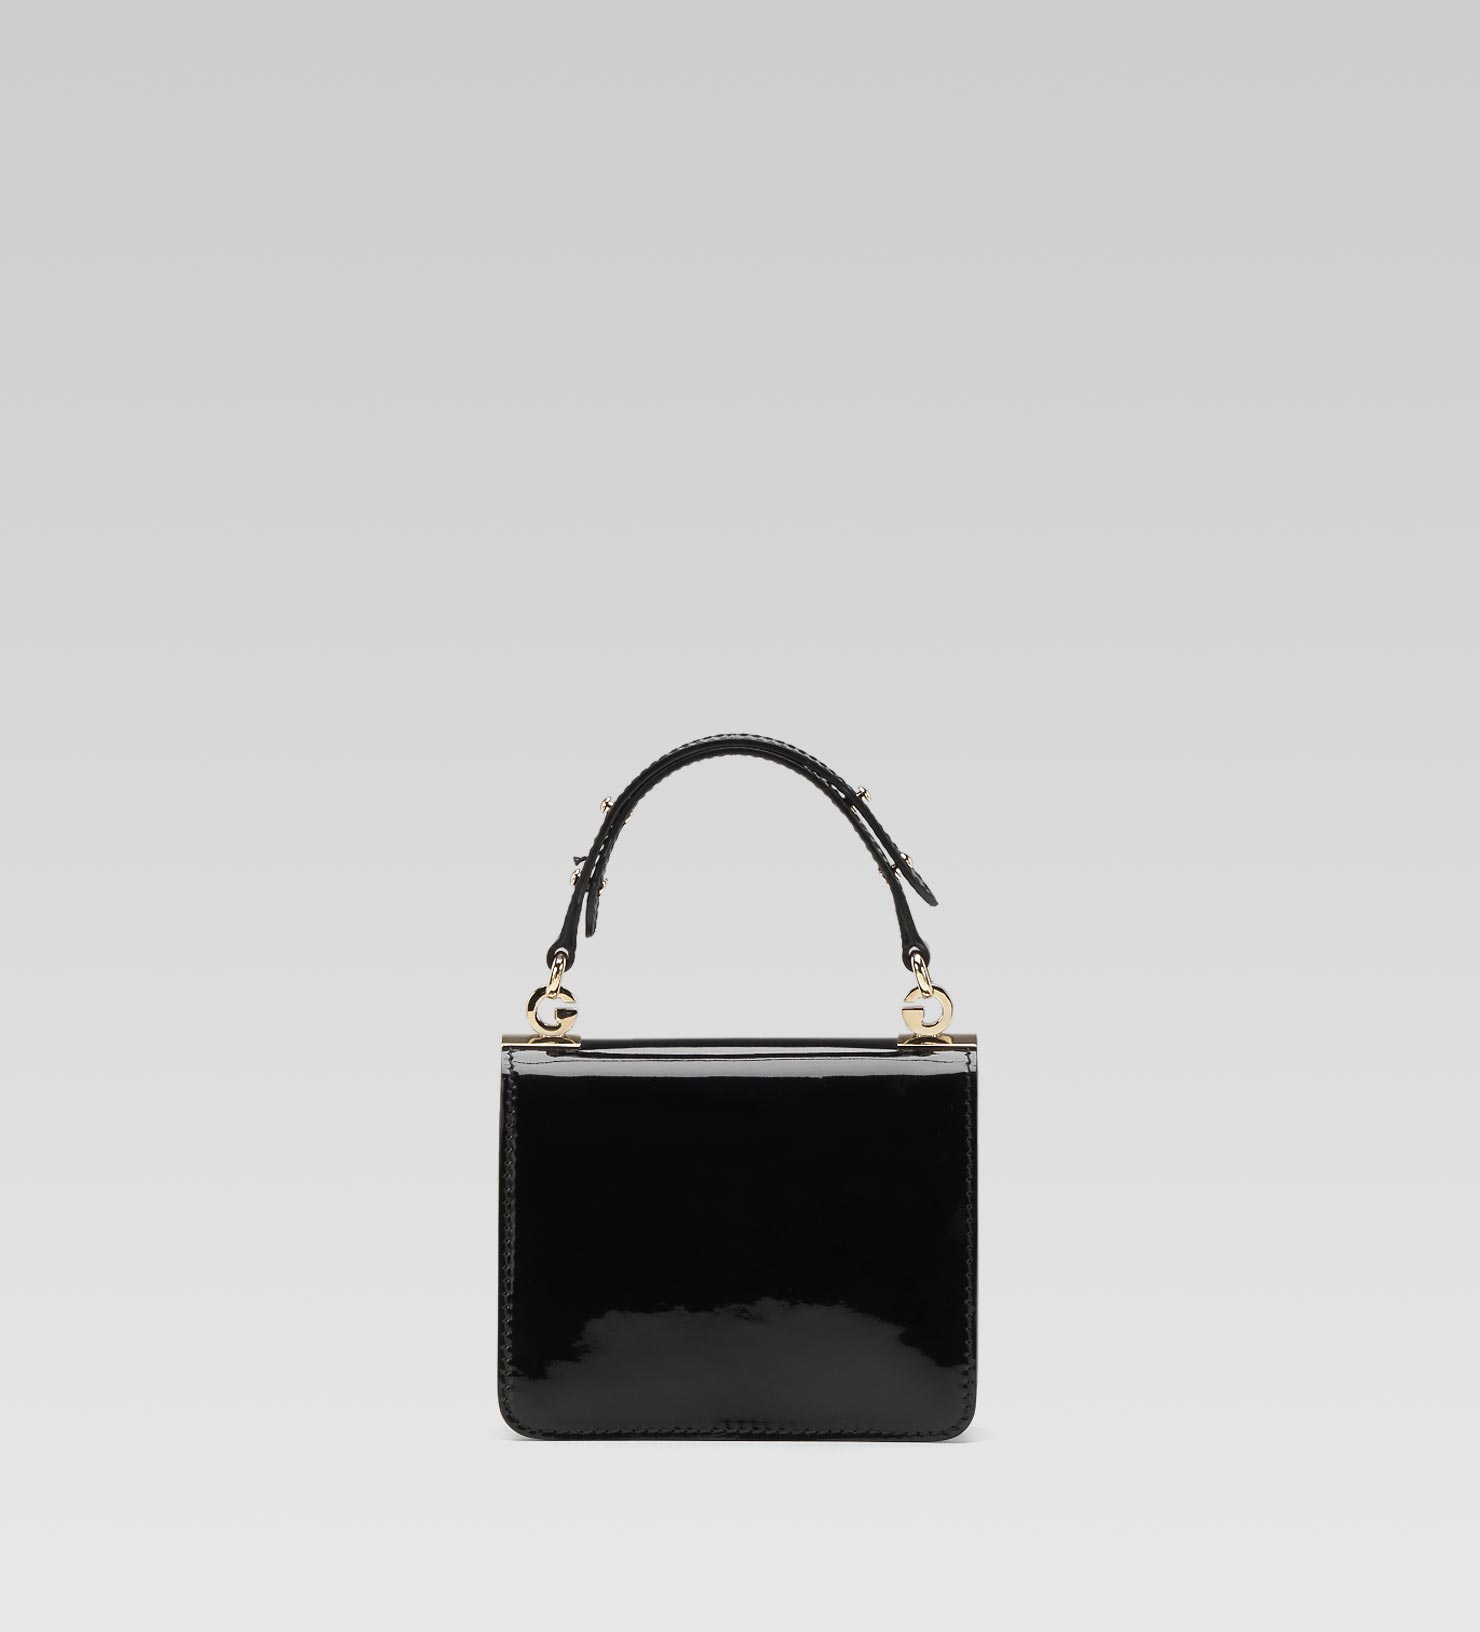 Gucci Gucci Black Patent Leather Top Handle Bag - Lyst